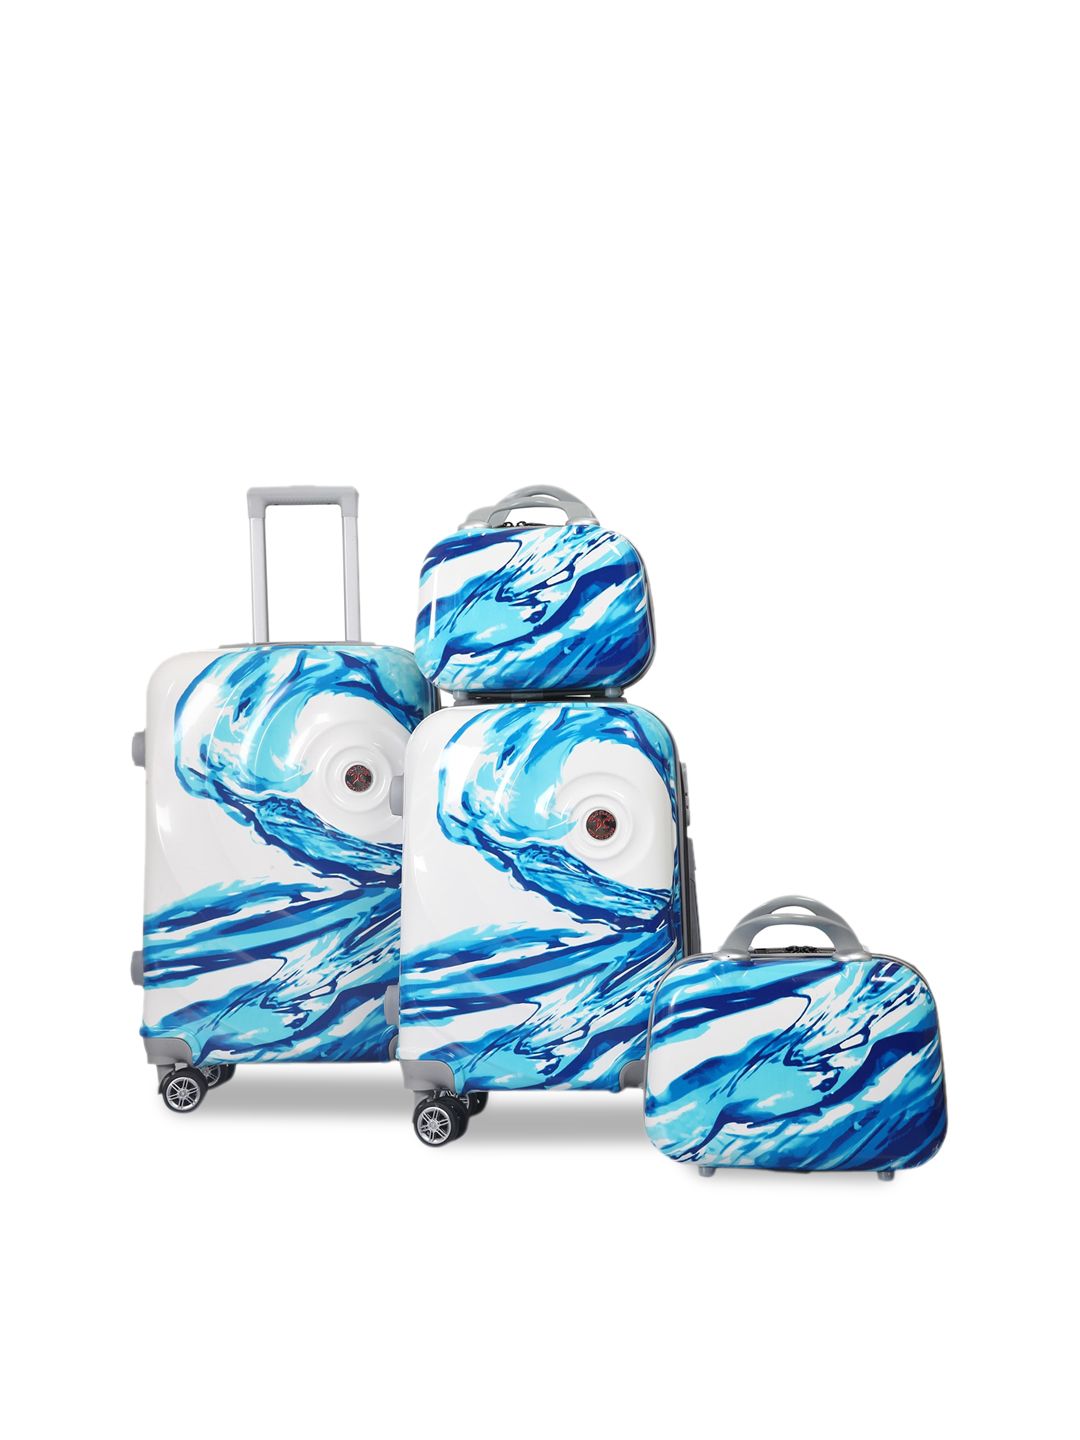 Polo Class Set Of 4 Blue & White Printed Hard-Sided Trolley Suitcases Price in India